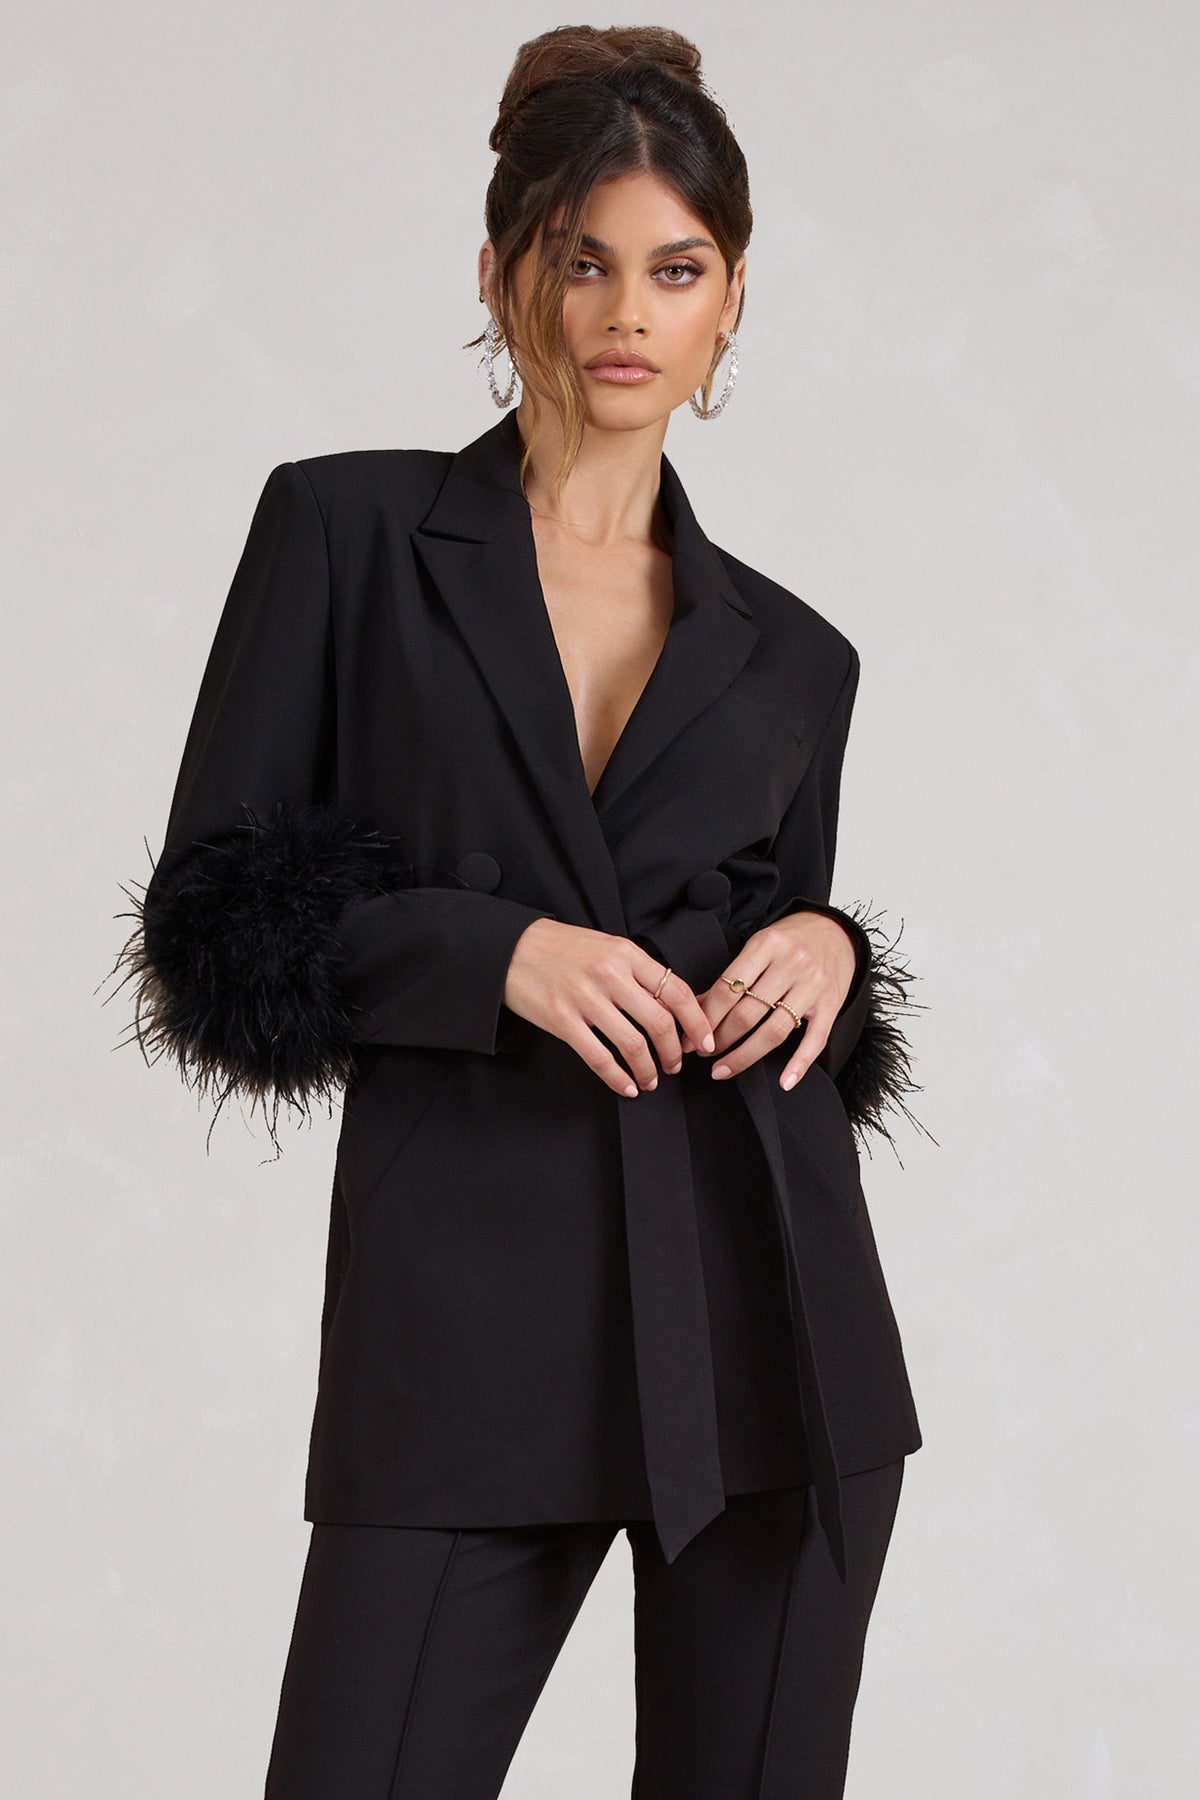 London Just – Blazer L Black Feather - USA Like That Club With Detail Belted